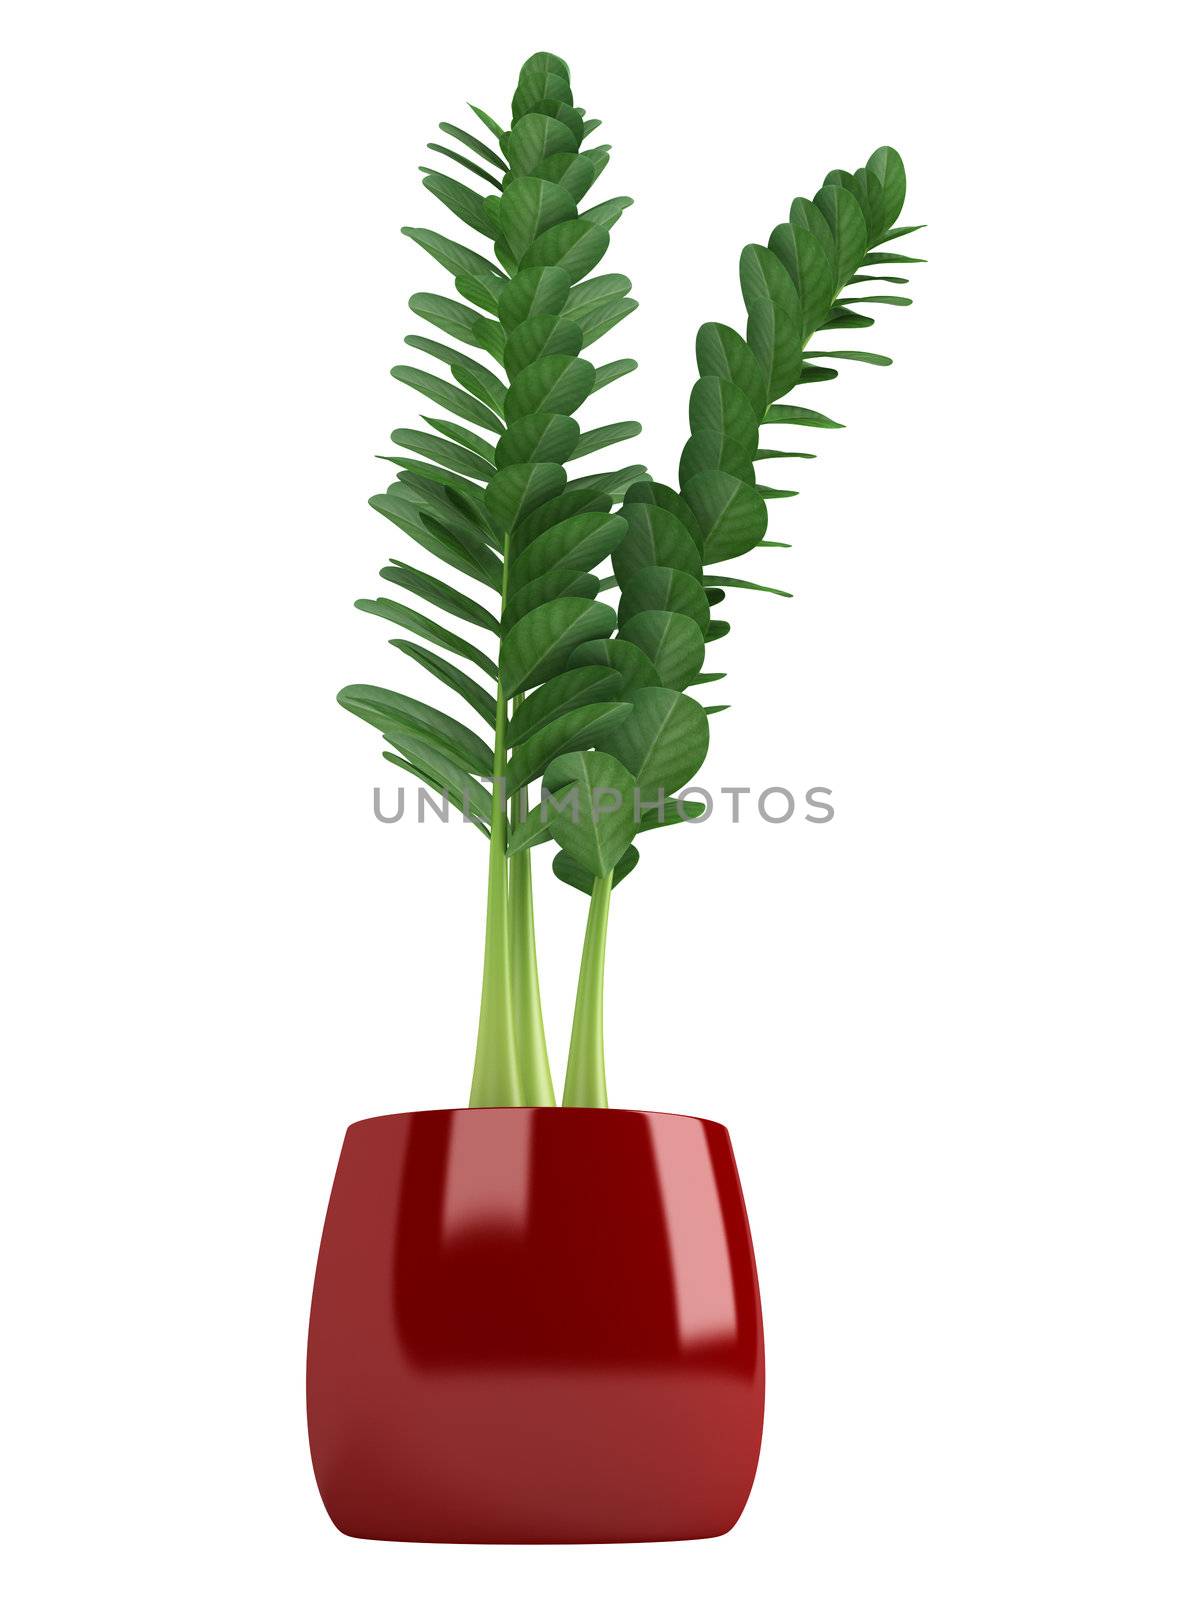 Zamiokulkas or the Zanzibar Gem is a flowering plant often used as an indoor houseplant for decorative purposes isolated on white